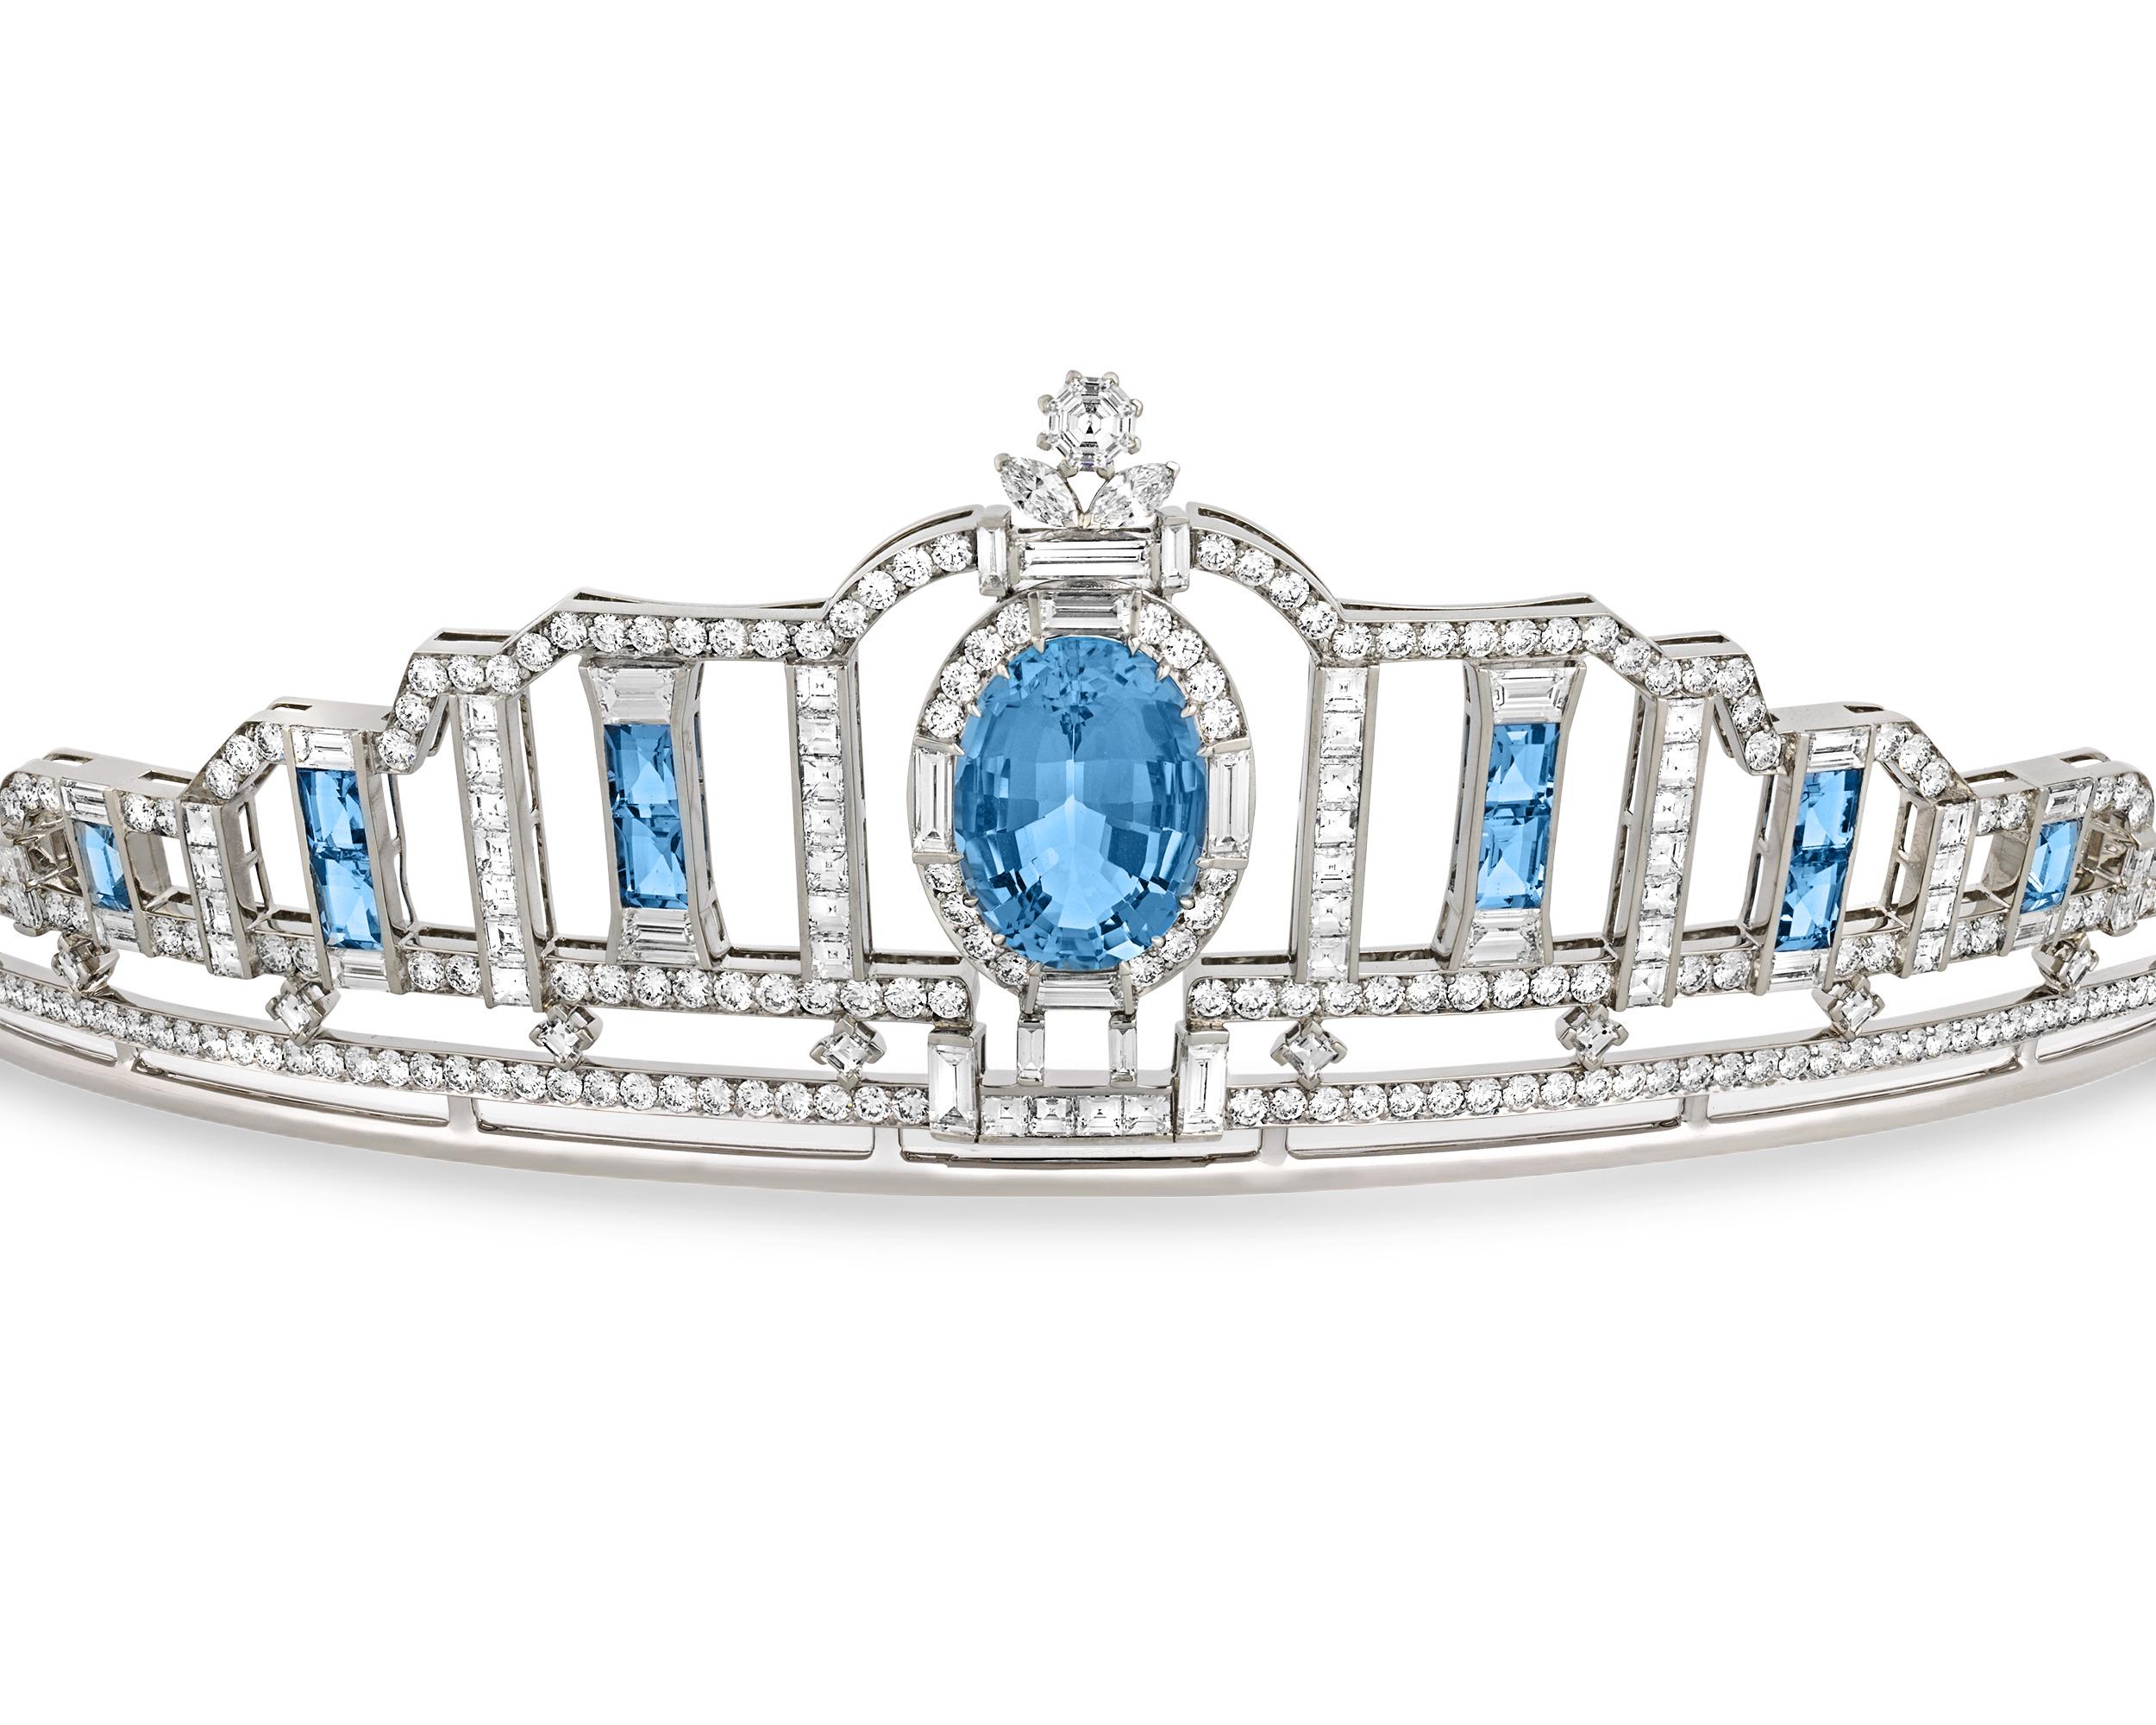 With the stunning blue hue of a clear tropical ocean, the incredible aquamarines in this tiara are absolutely captivating. The brilliant stones total 15.00 carats and are all set in a masterful Art Deco-inspired platinum and 18K white gold design by